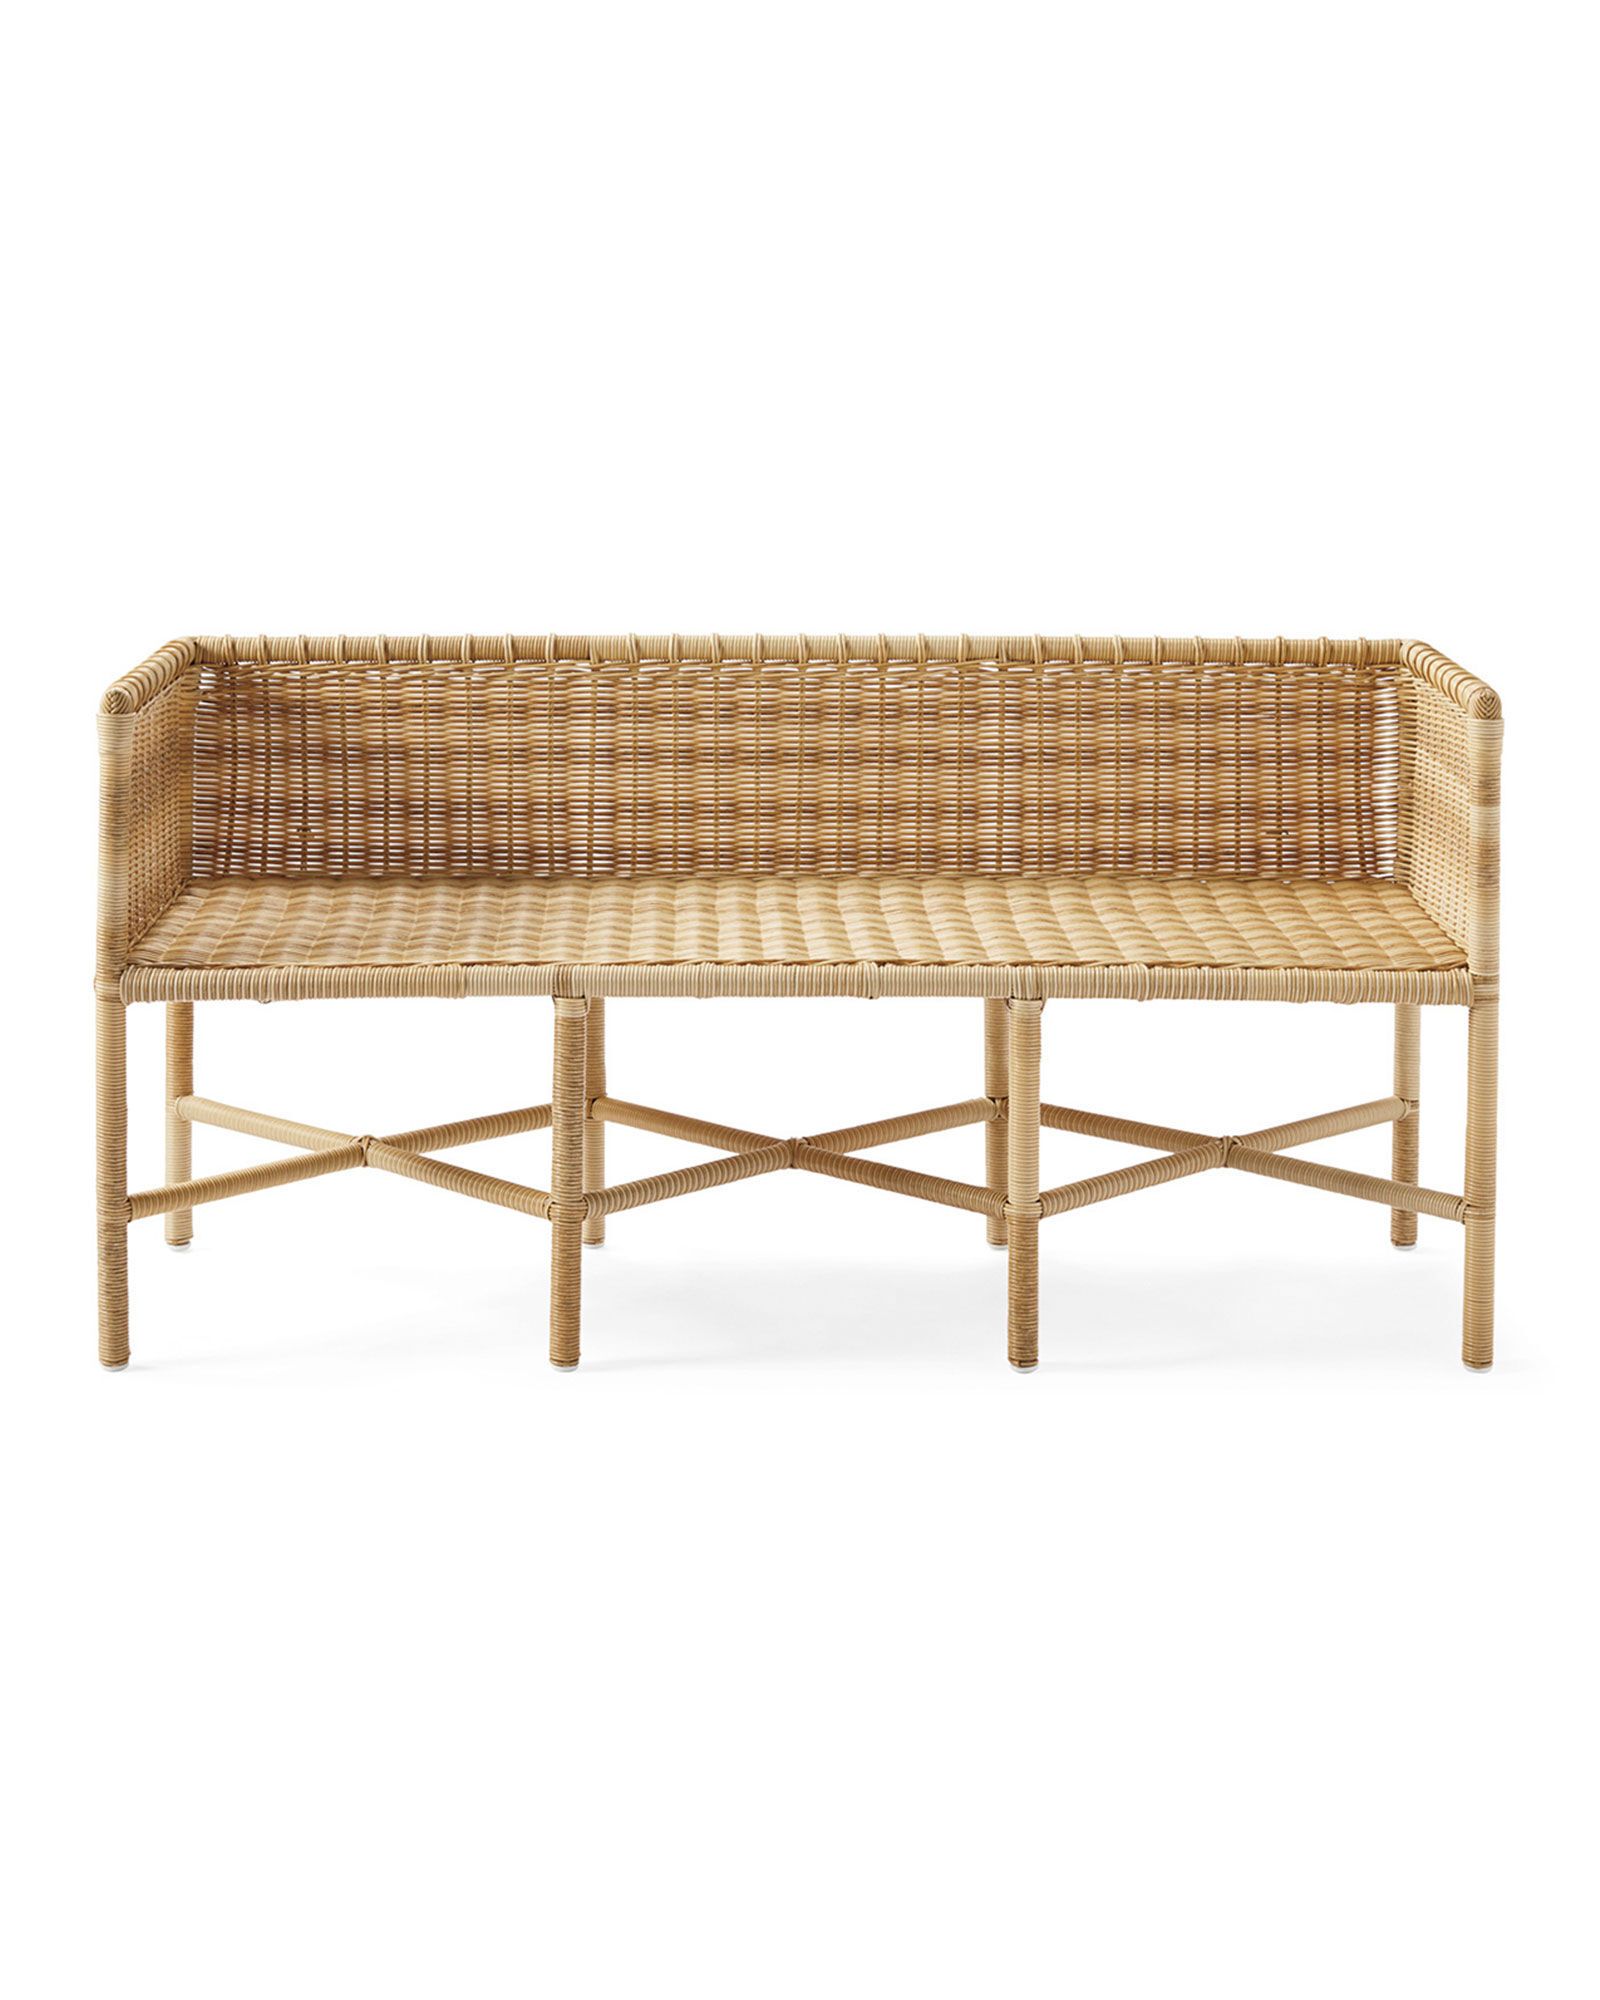 Pacifica Bench | Serena and Lily